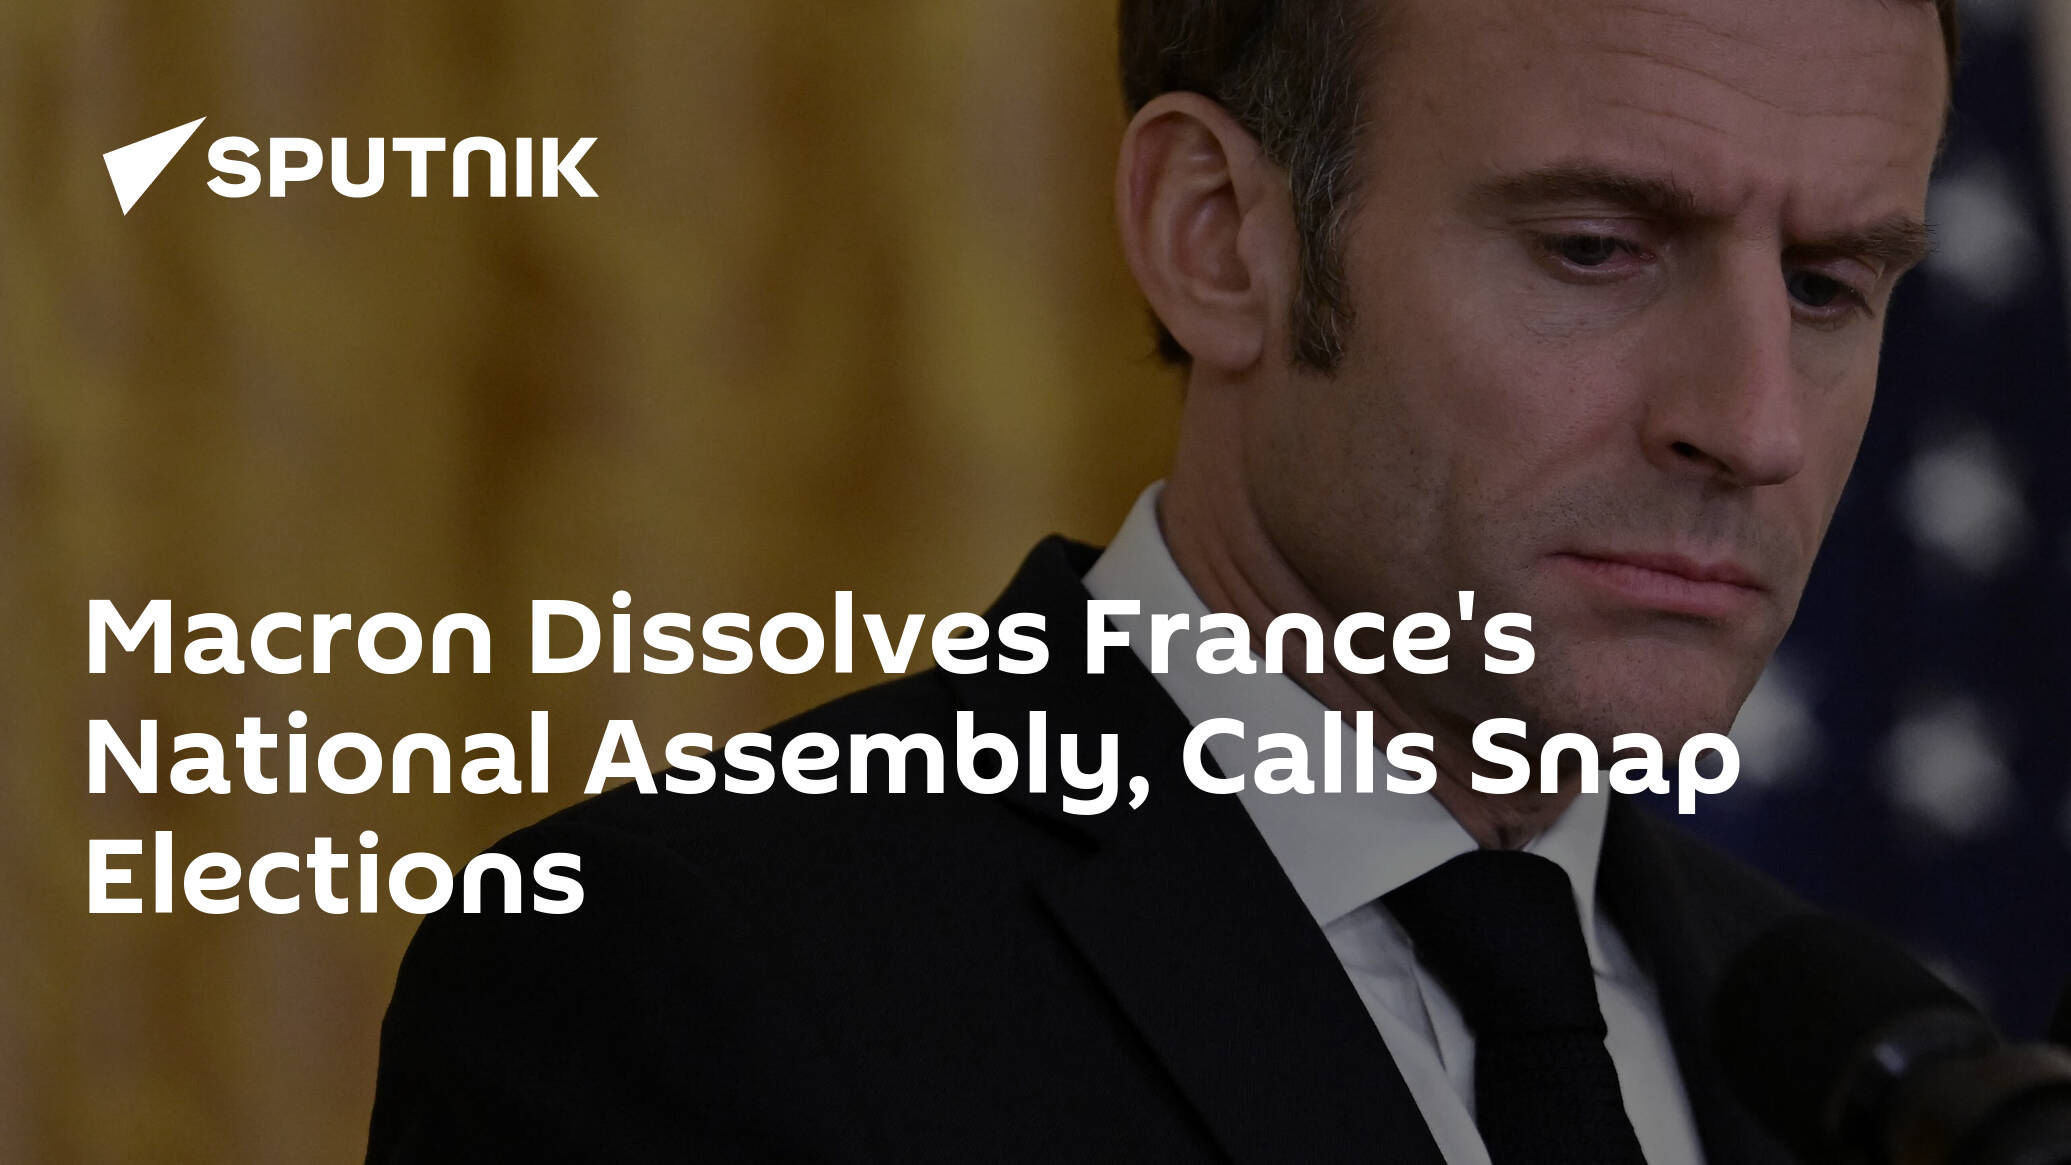 Macron Dissolves France's National Assembly, Calls Snap Elections